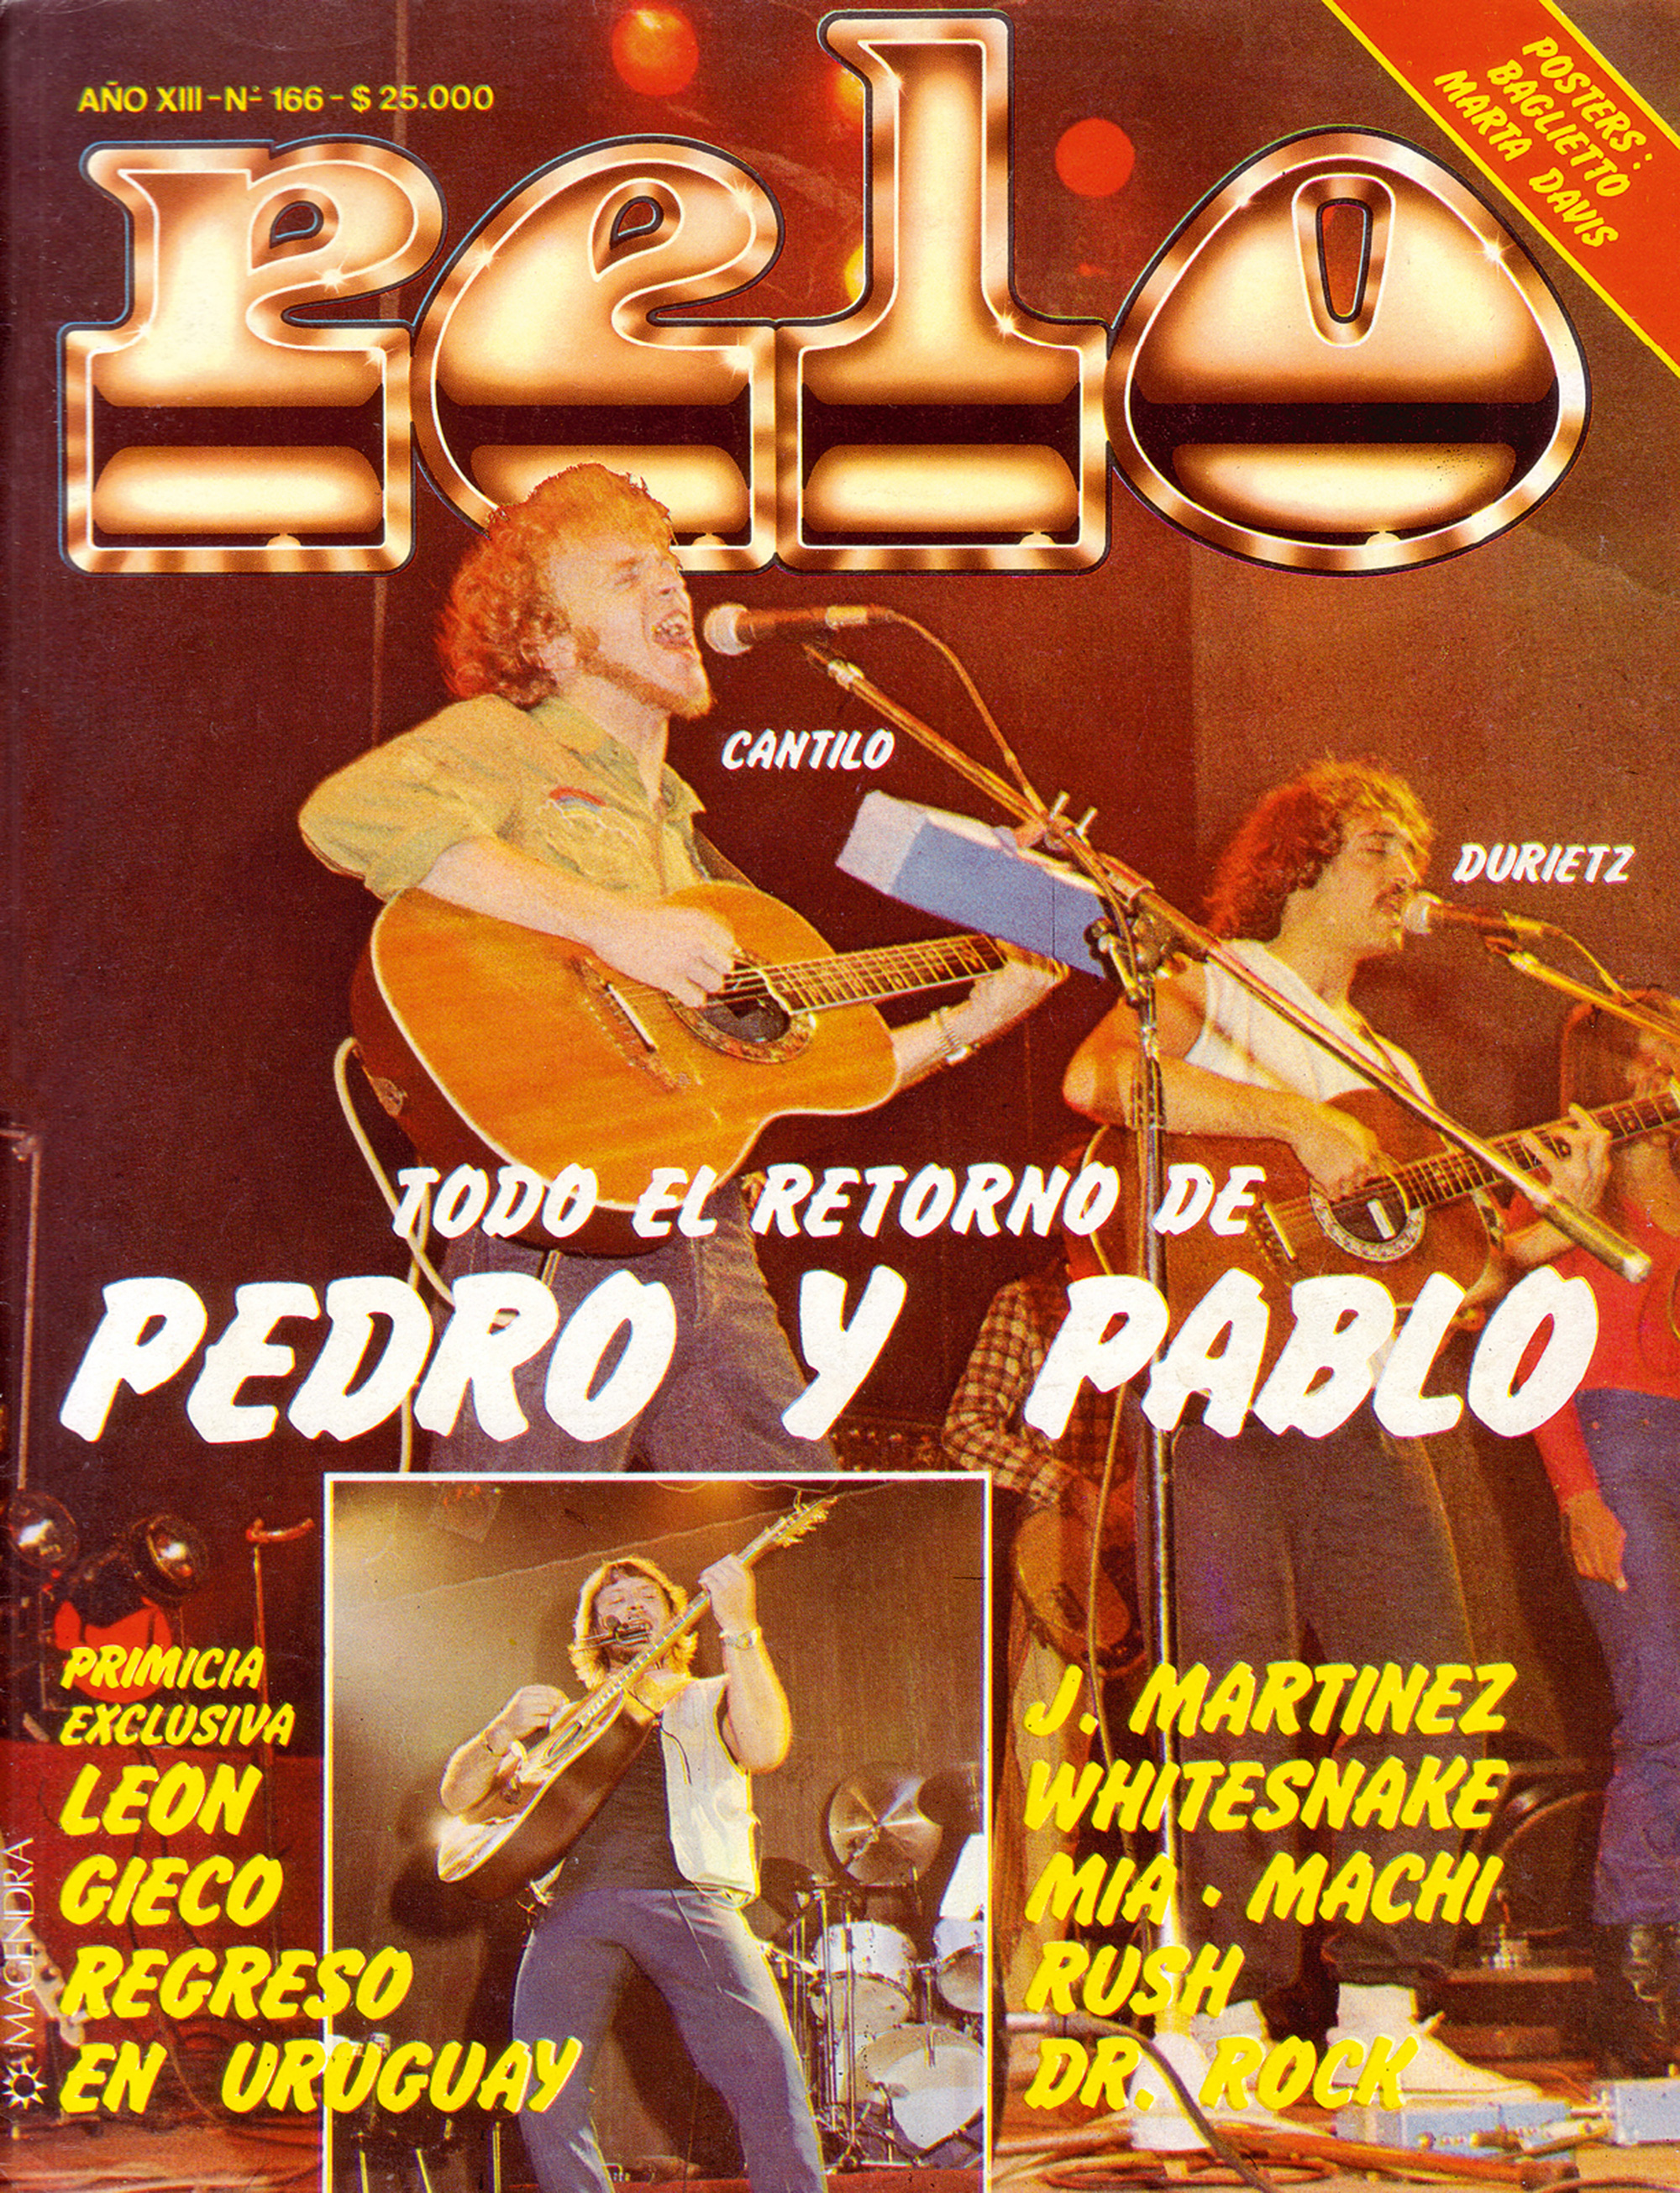 A nineteen eighty-two cover of the influential Argentine music magazine Pelo (Hair), featuring the return of Pedro y Pablo.